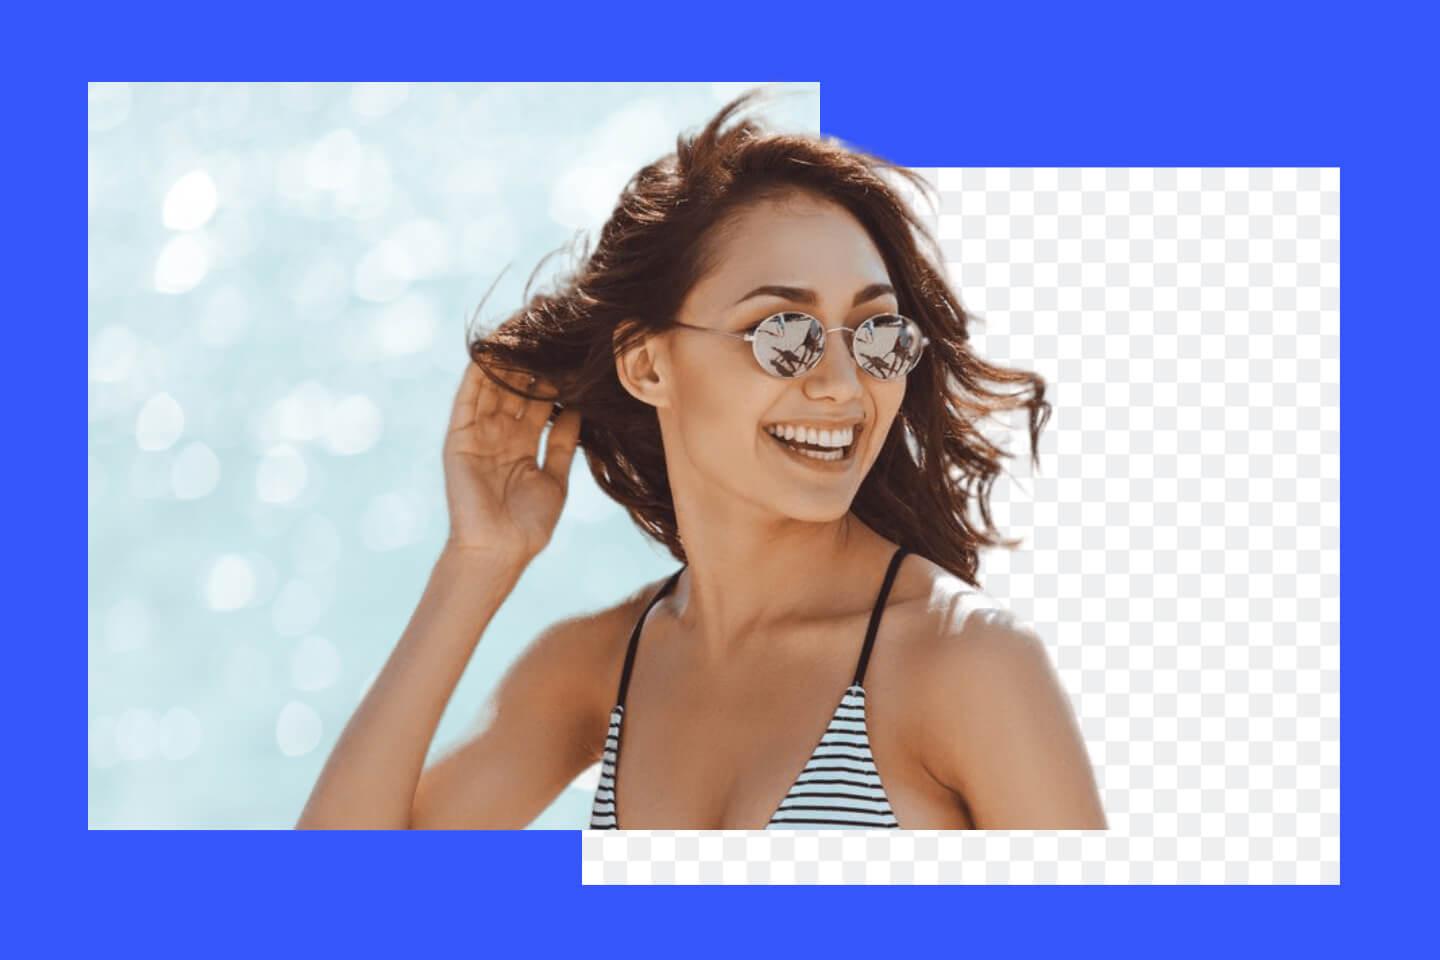 Remove People From Photos Online in Seconds for Free